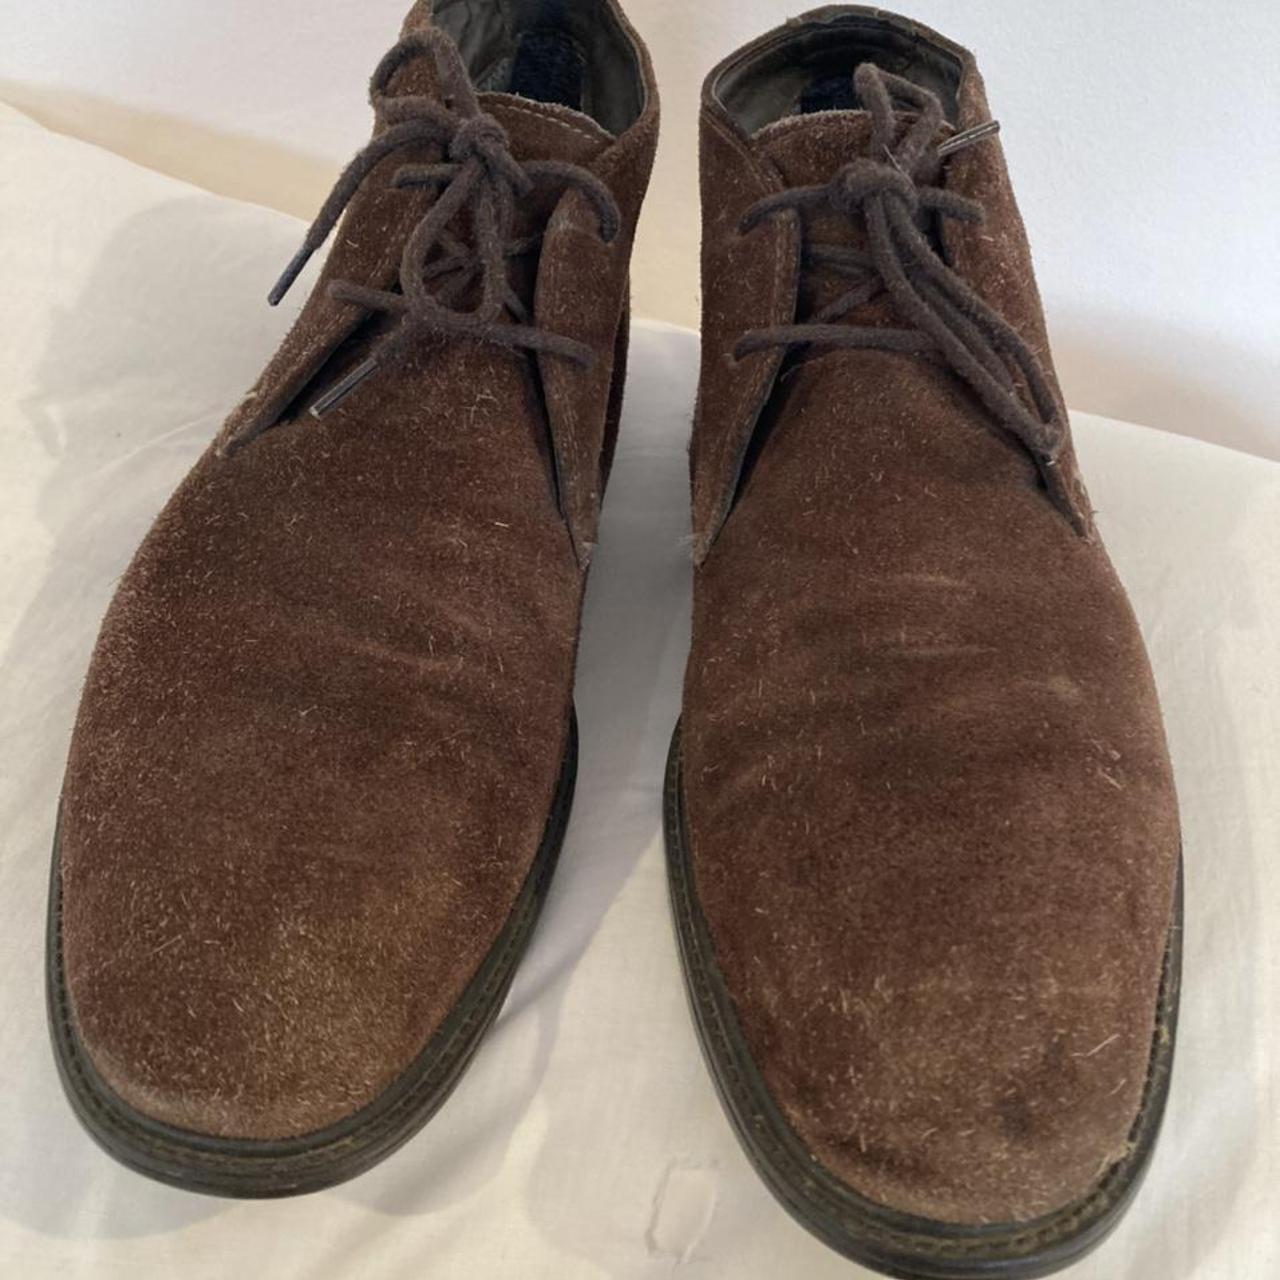 Product Image 2 - Men’s Brown Suede Gortex Ankle